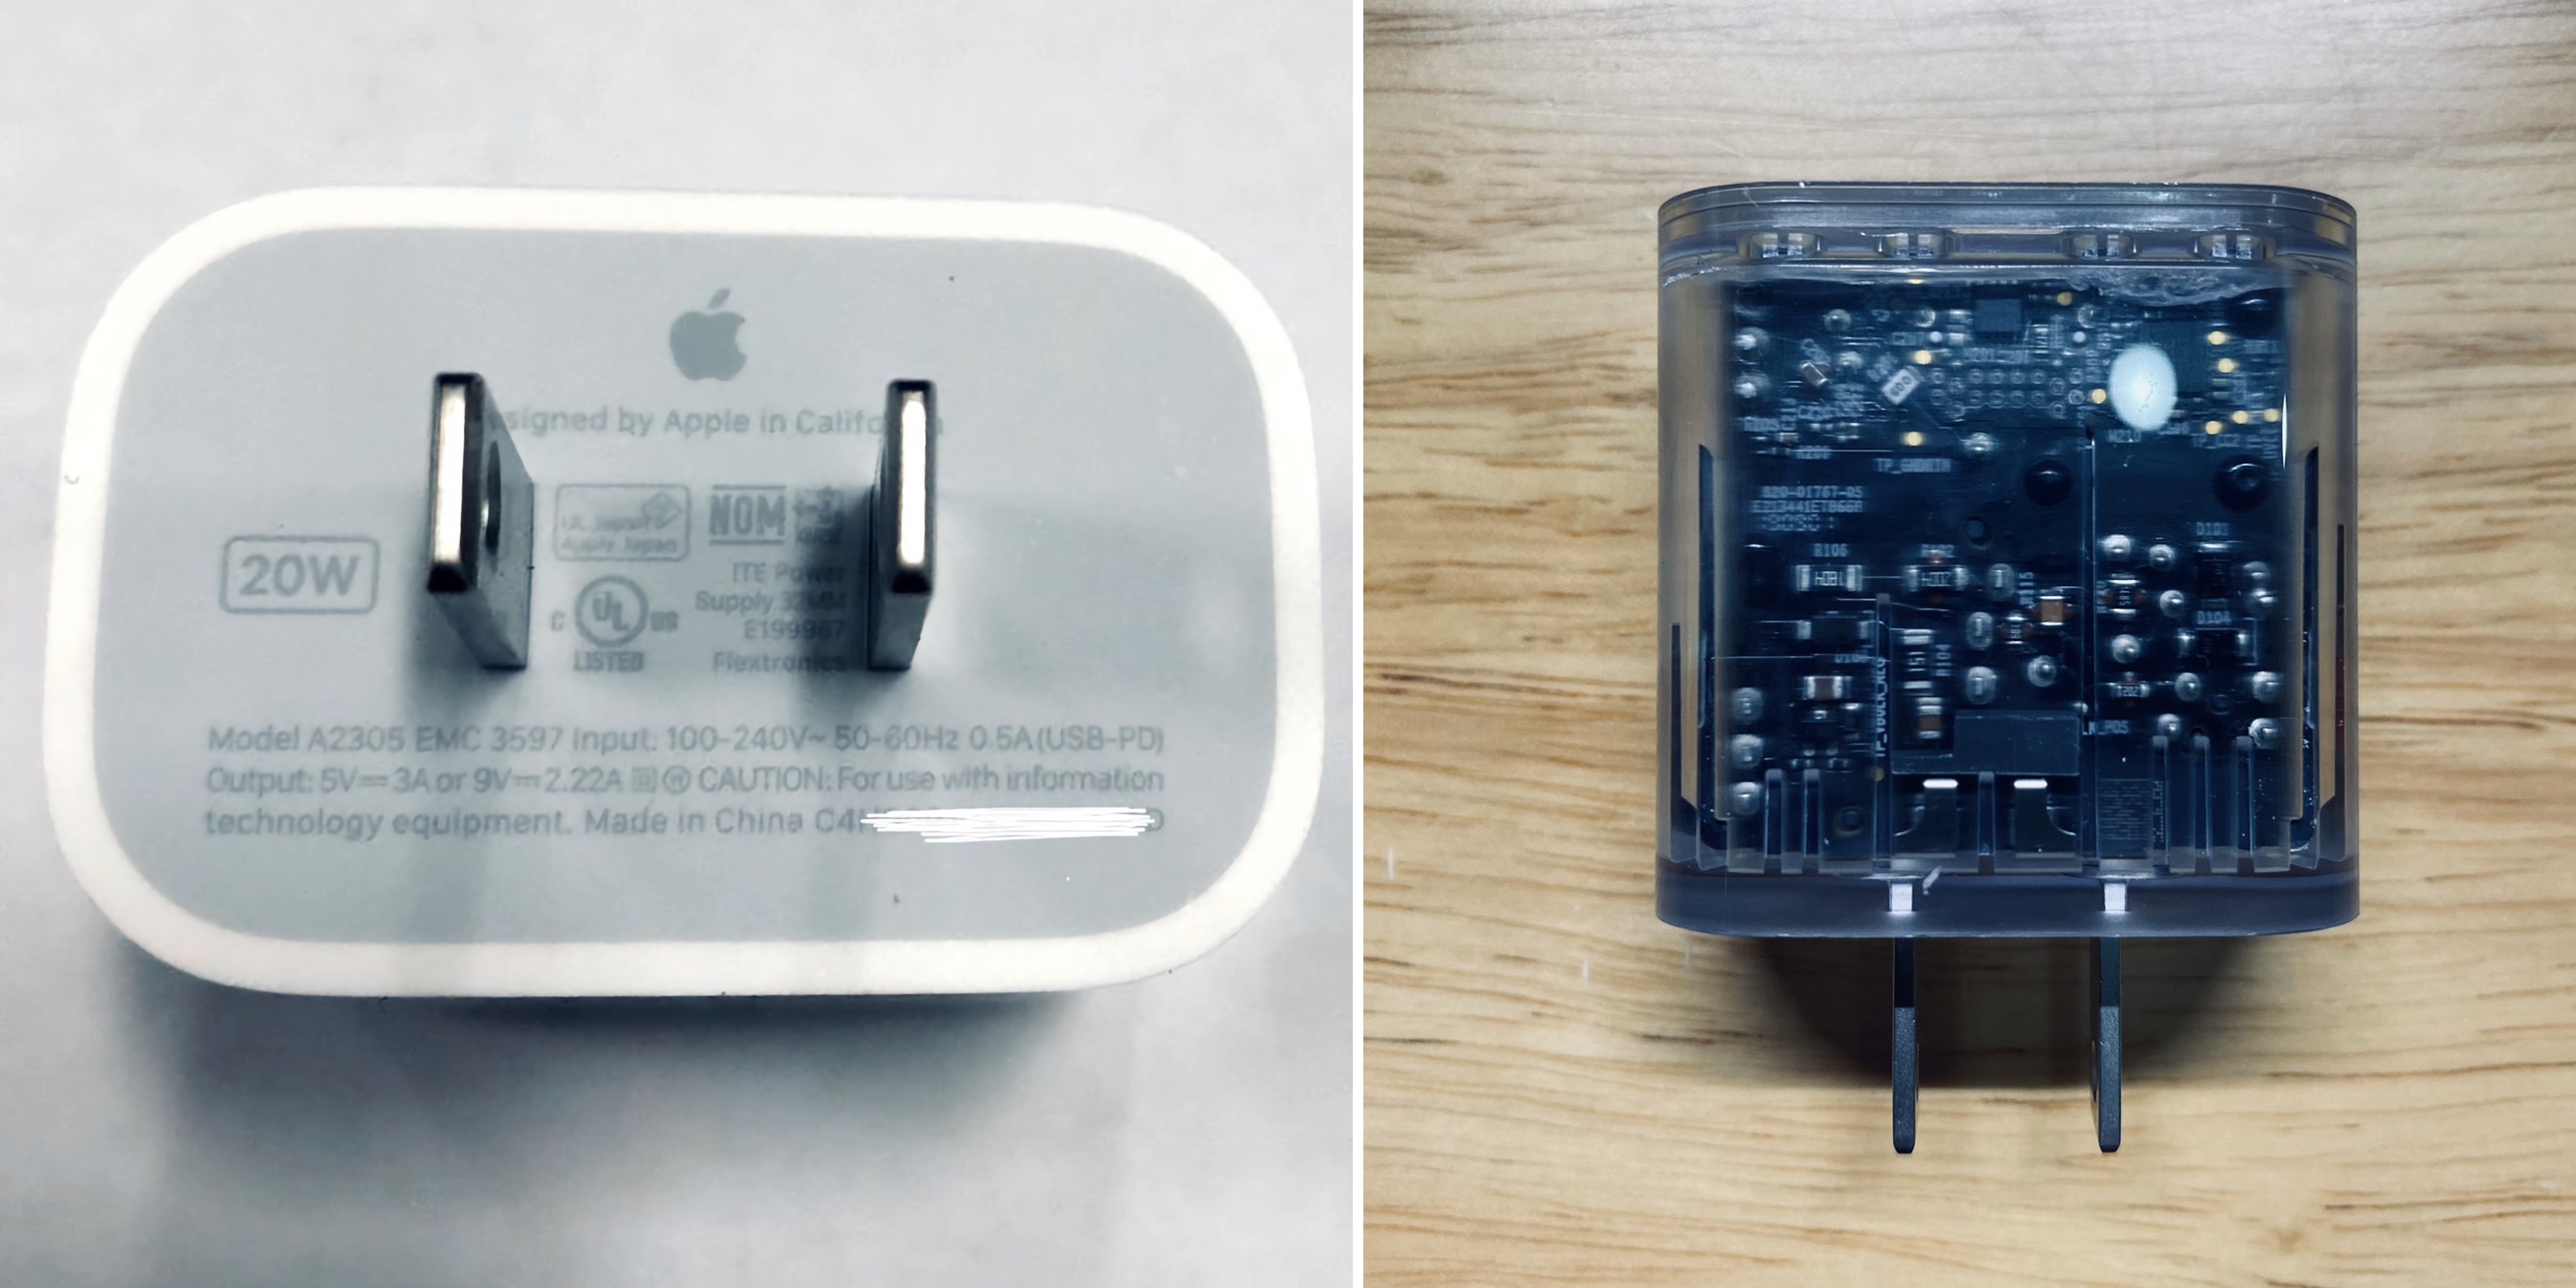 Photos: Apple to ship new 20 W power adapter with iPhone 12 - 9to5Mac